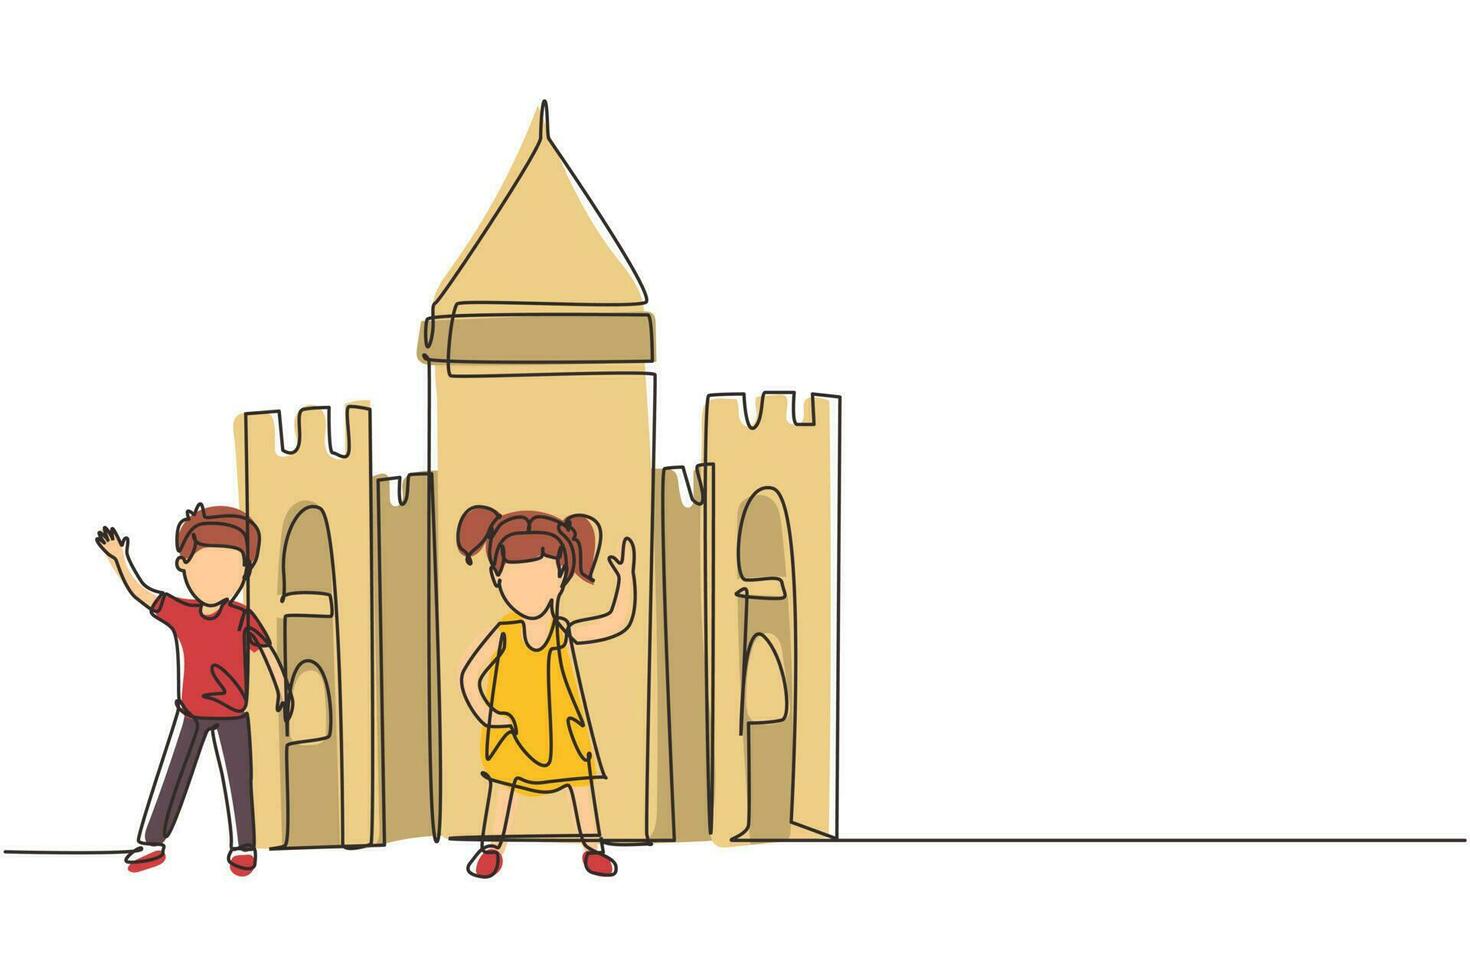 Single one line drawing kids with cardboard castle for school play. Cheerful children playing in castle made of cardboard boxes. Creative kid playing castle. Continuous line draw design graphic vector